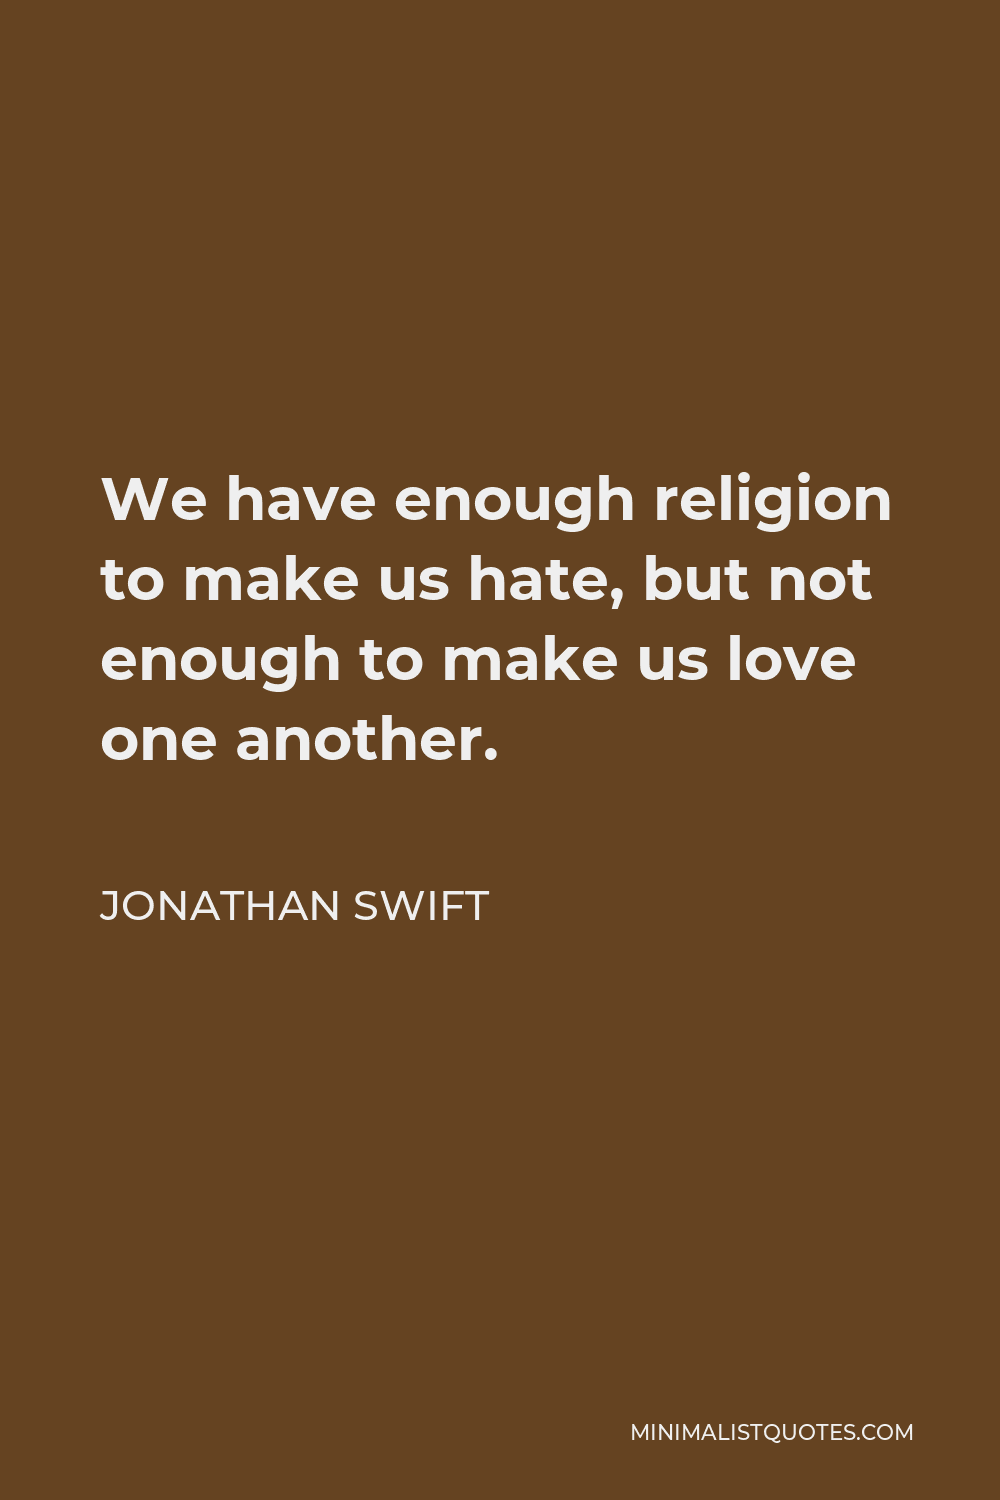 Jonathan Swift Quote - We have enough religion to make us hate, but not enough to make us love one another.